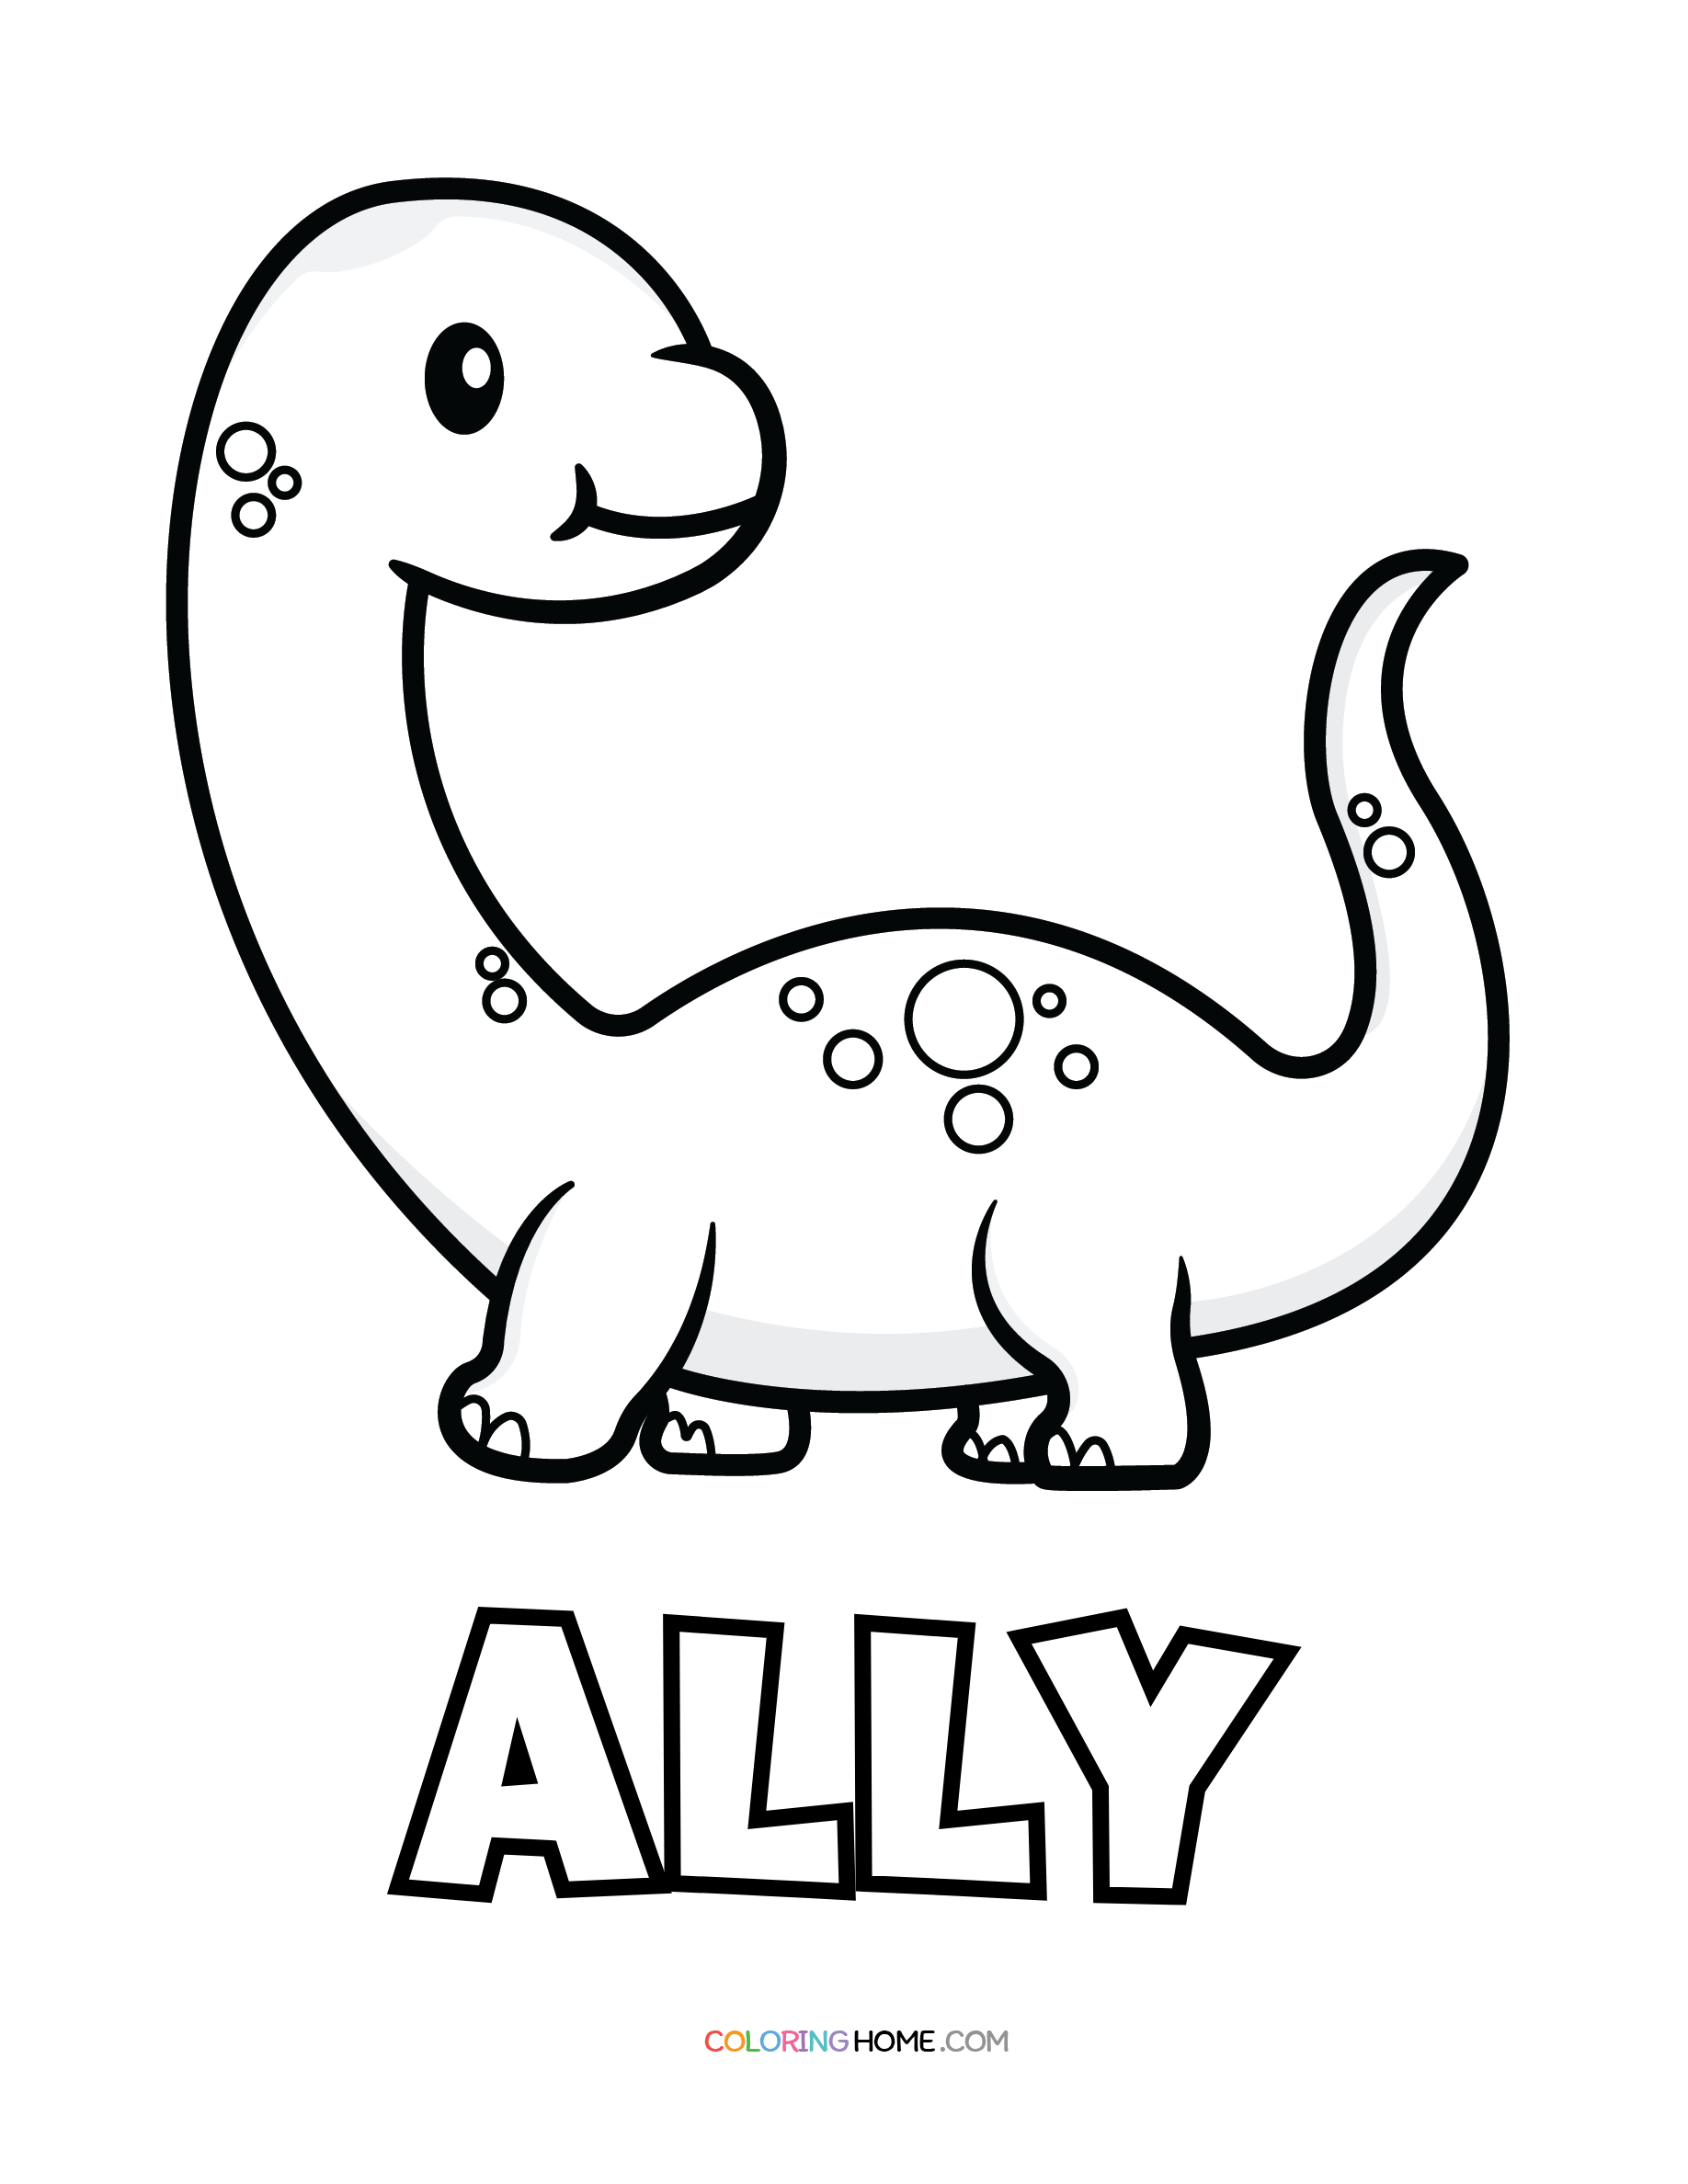 Ally dinosaur coloring page